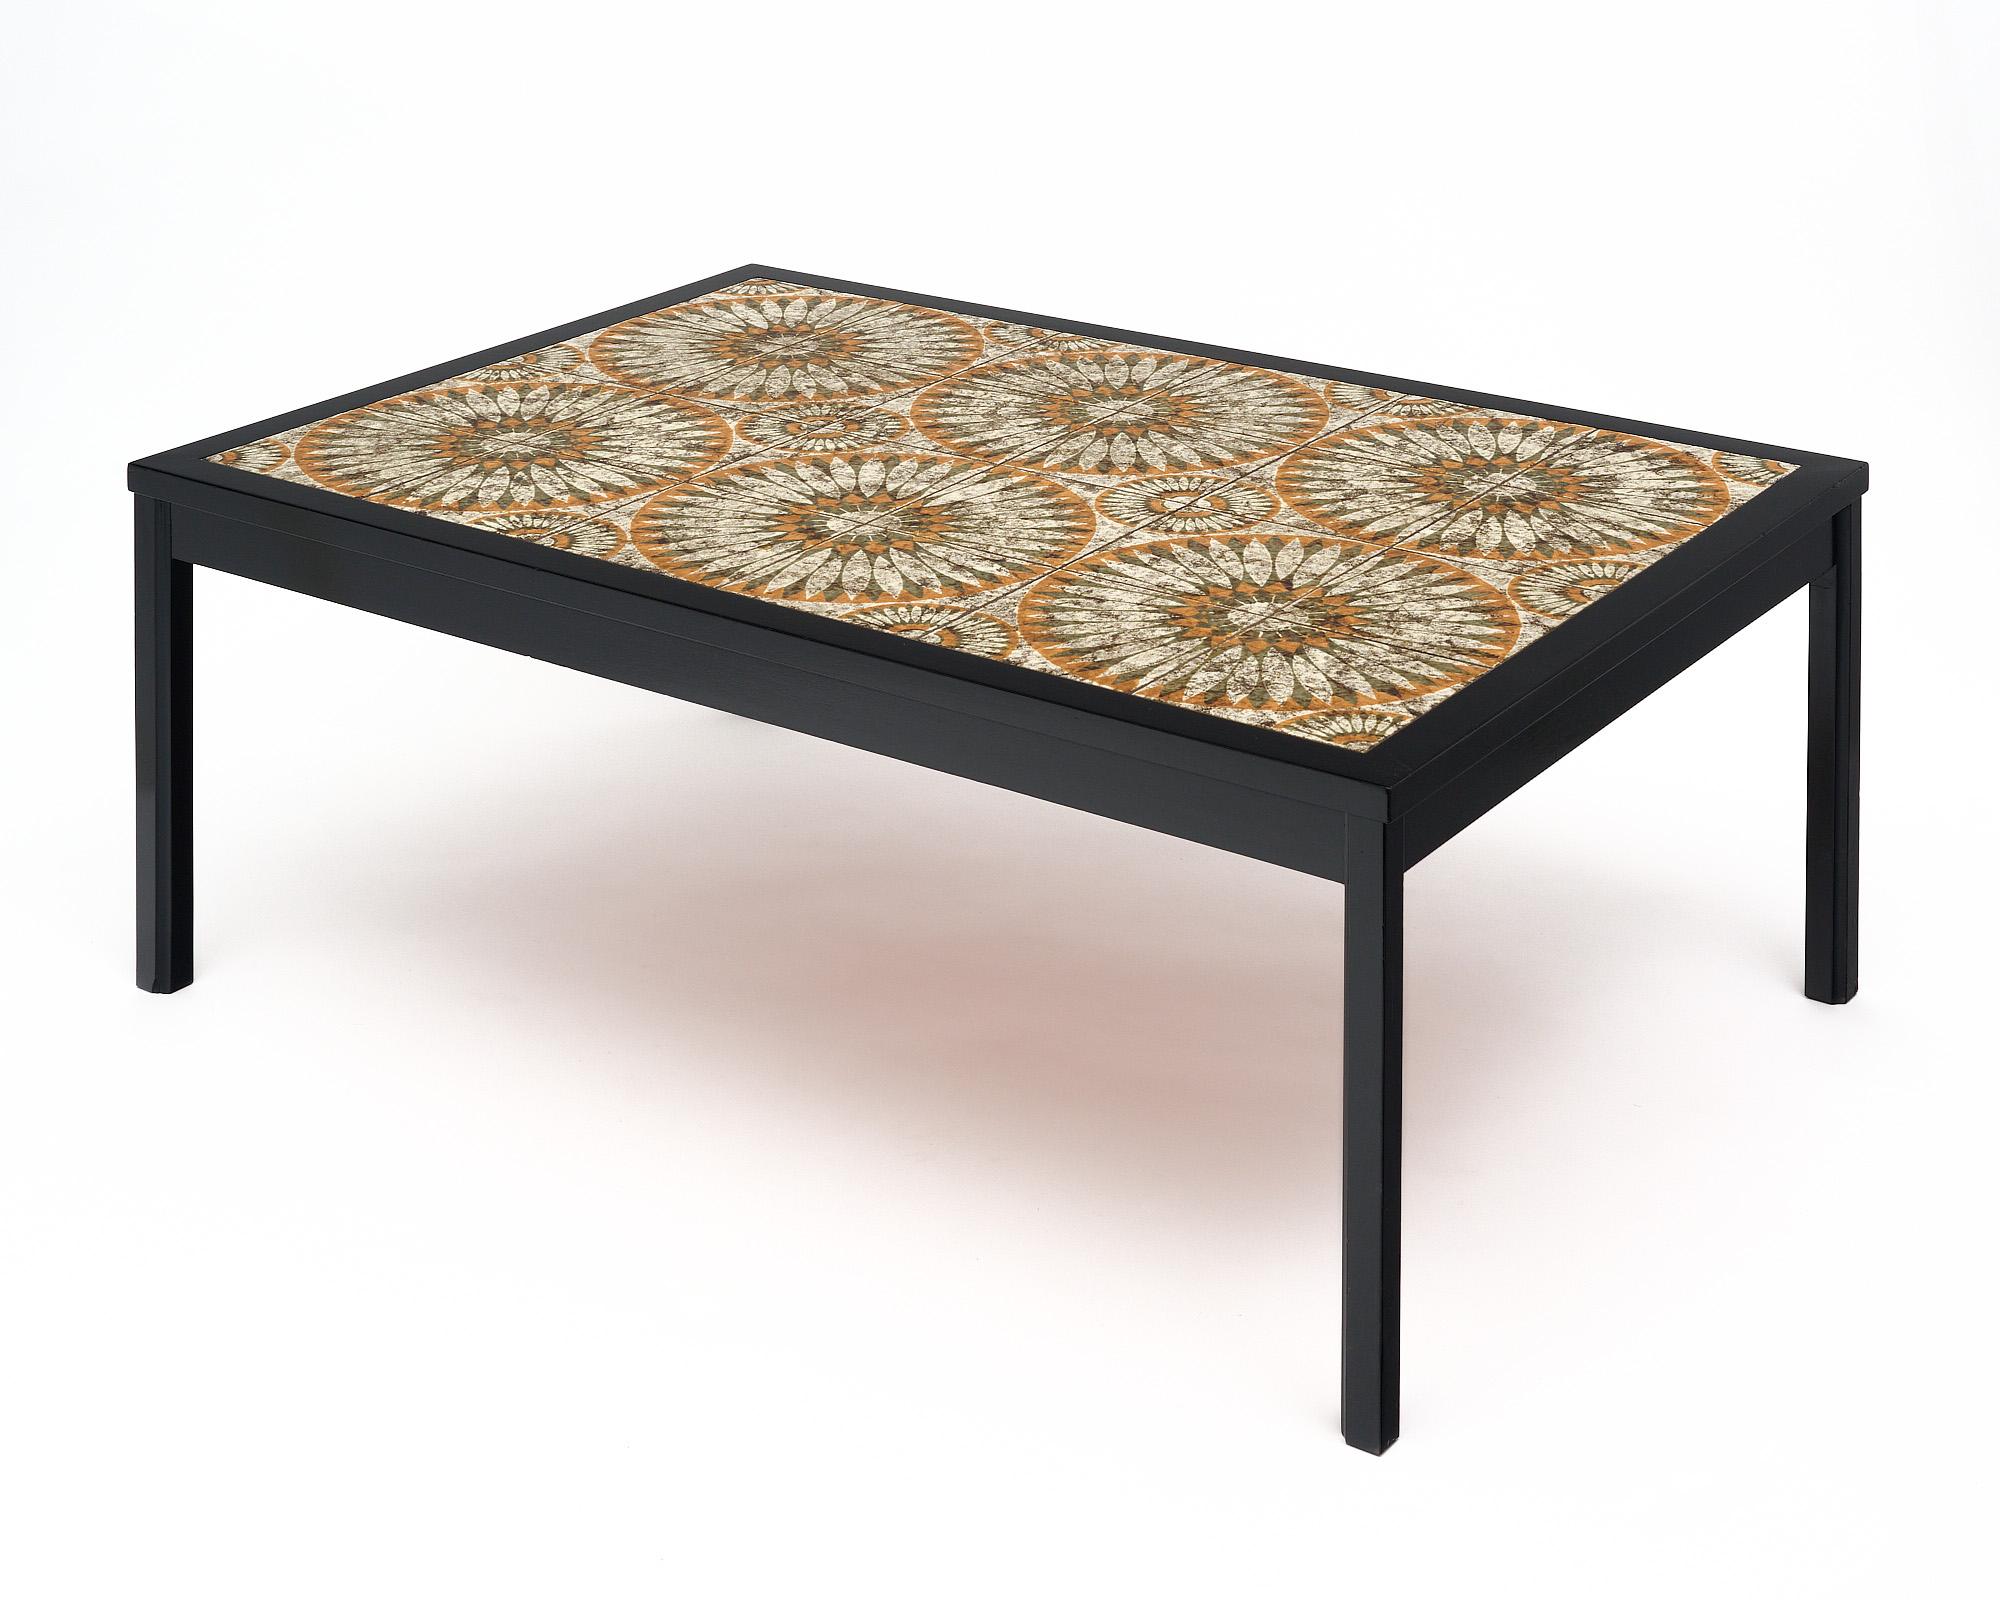 Coffee table with tiled top from Vallauris on the French Riviera. The tables structure is made of ebonized wood that has been finished with a lustrous museum-quality French polish. The top is tiled with hand-crafted and painted terracotta tiles with